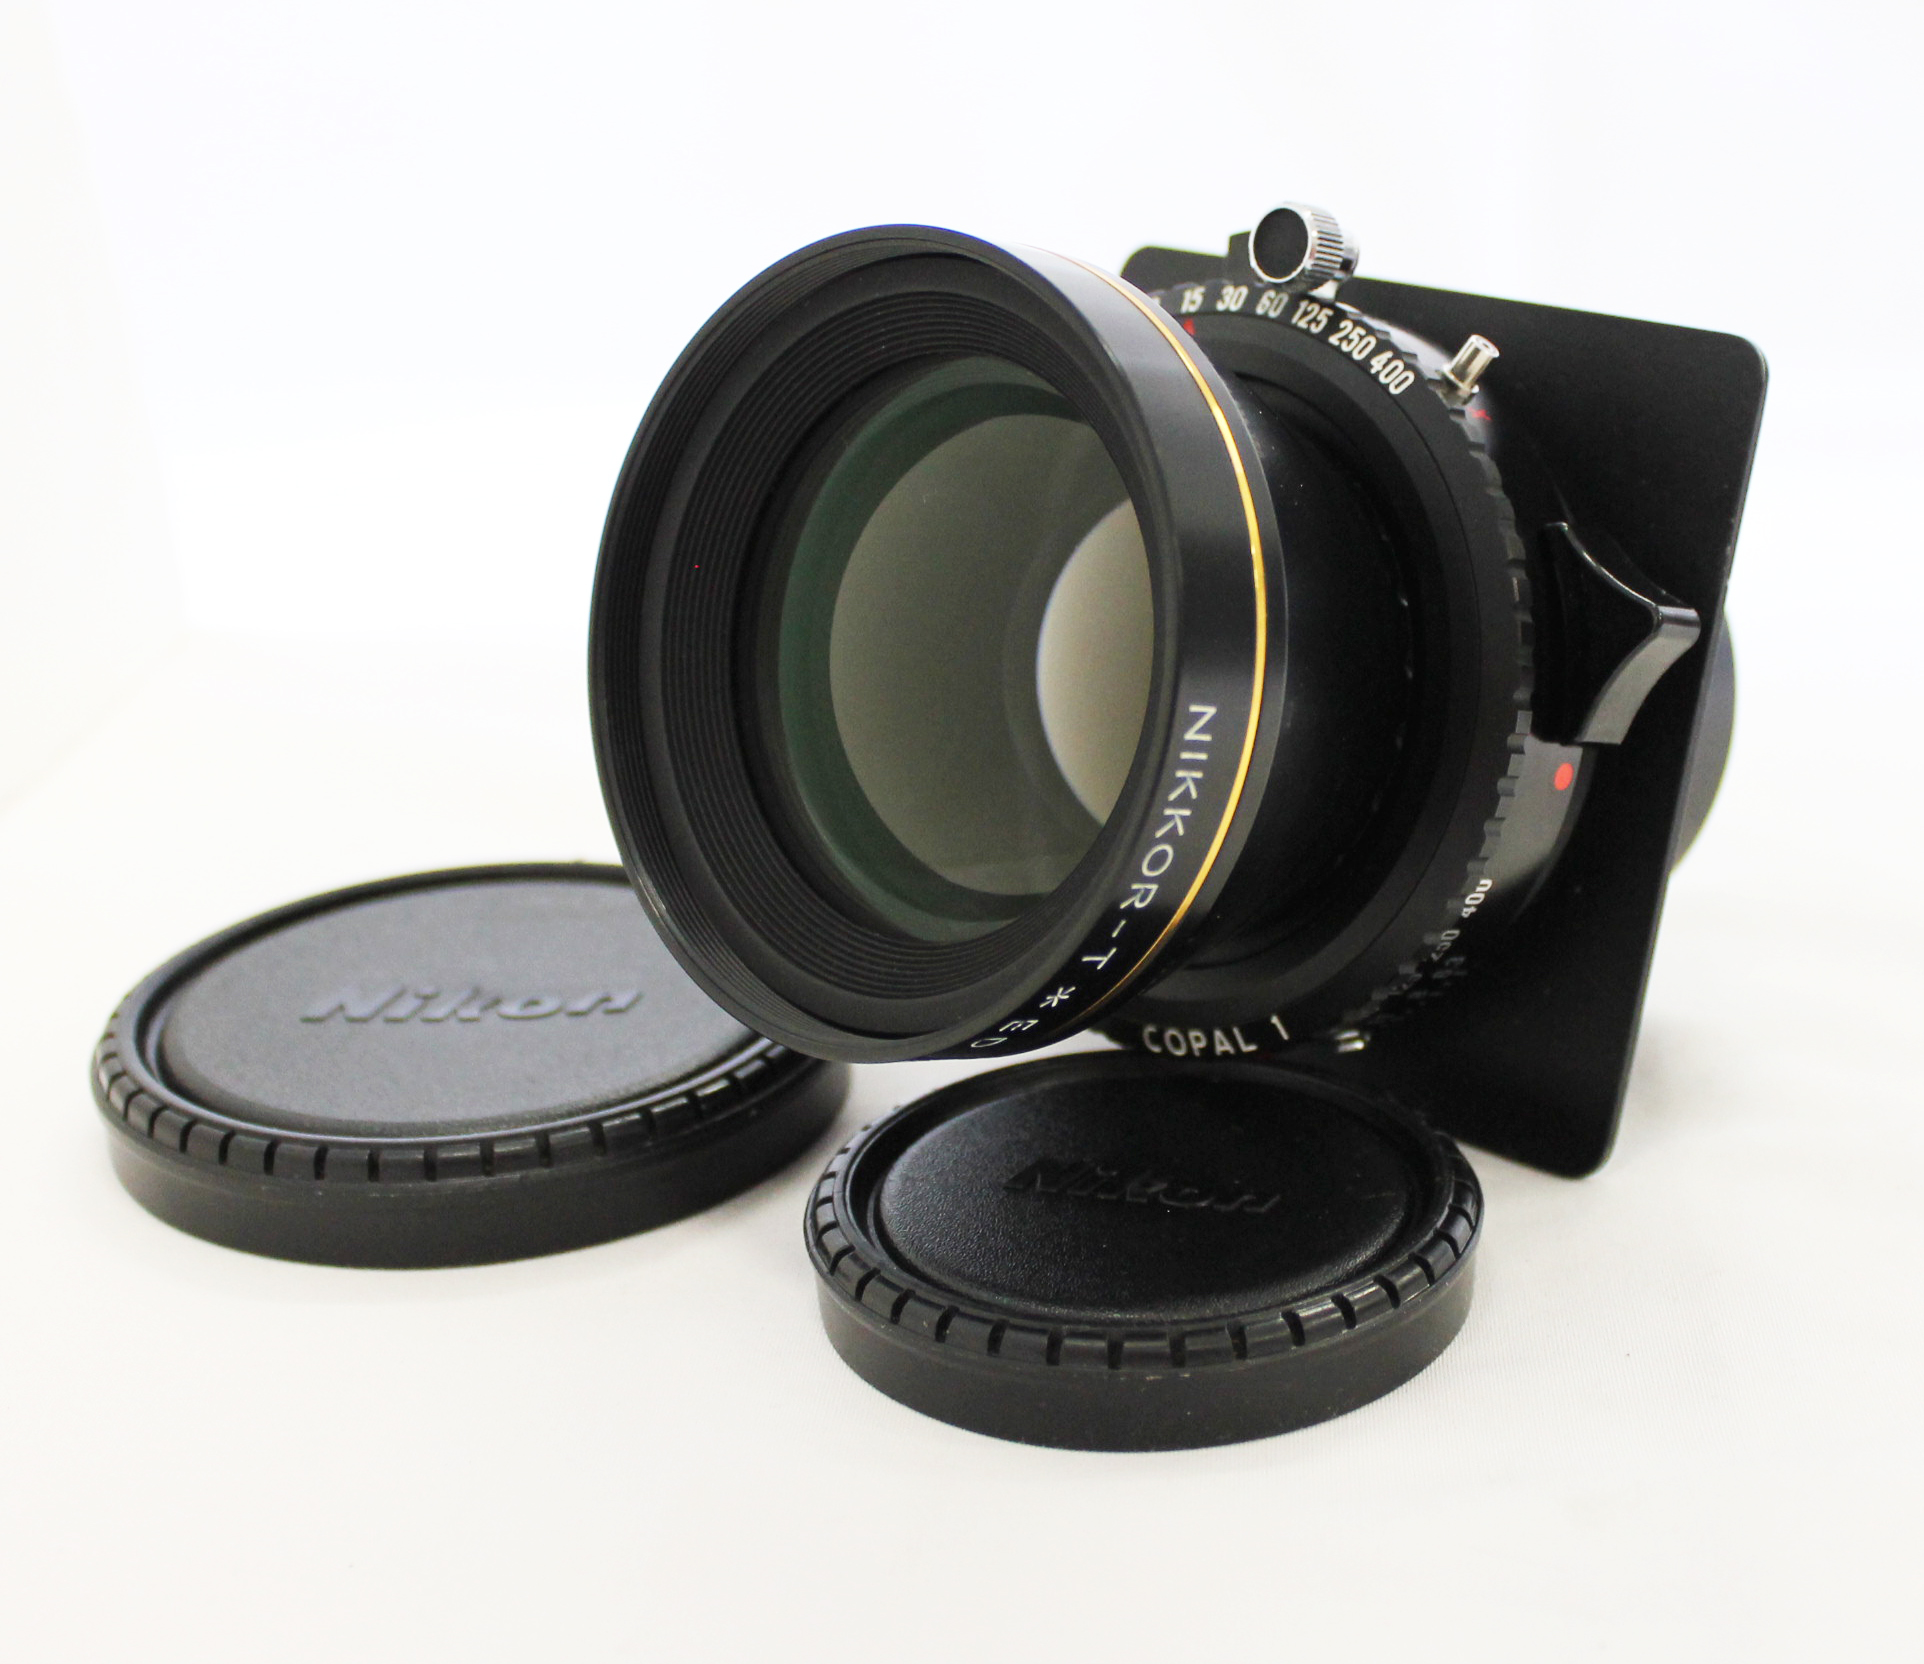 Japan Used Camera Shop | [Near Mint] Nikon NIKKOR-T* ED 270mm F/6.3 Large Format Lens with COPAL 1 Shutter from Japan